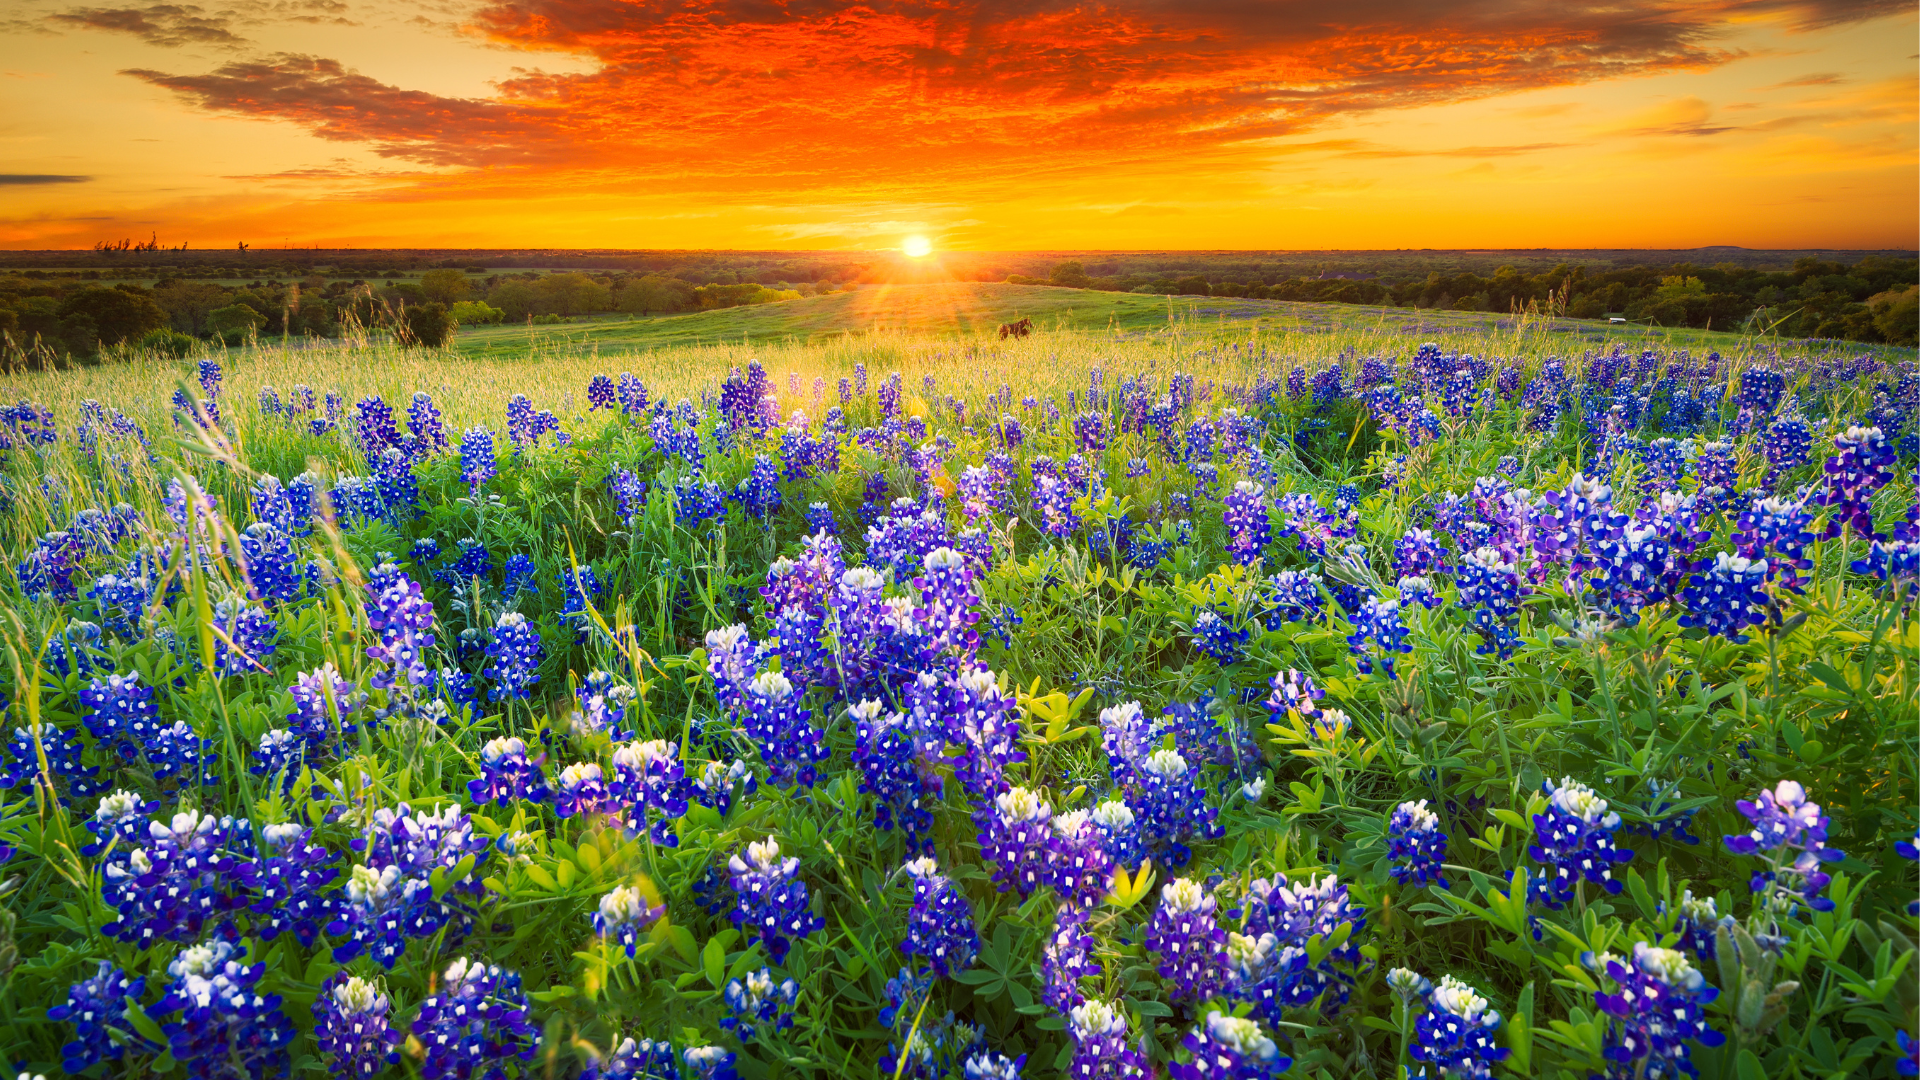 Bluebonnet field with sunset in back ground and orange sky